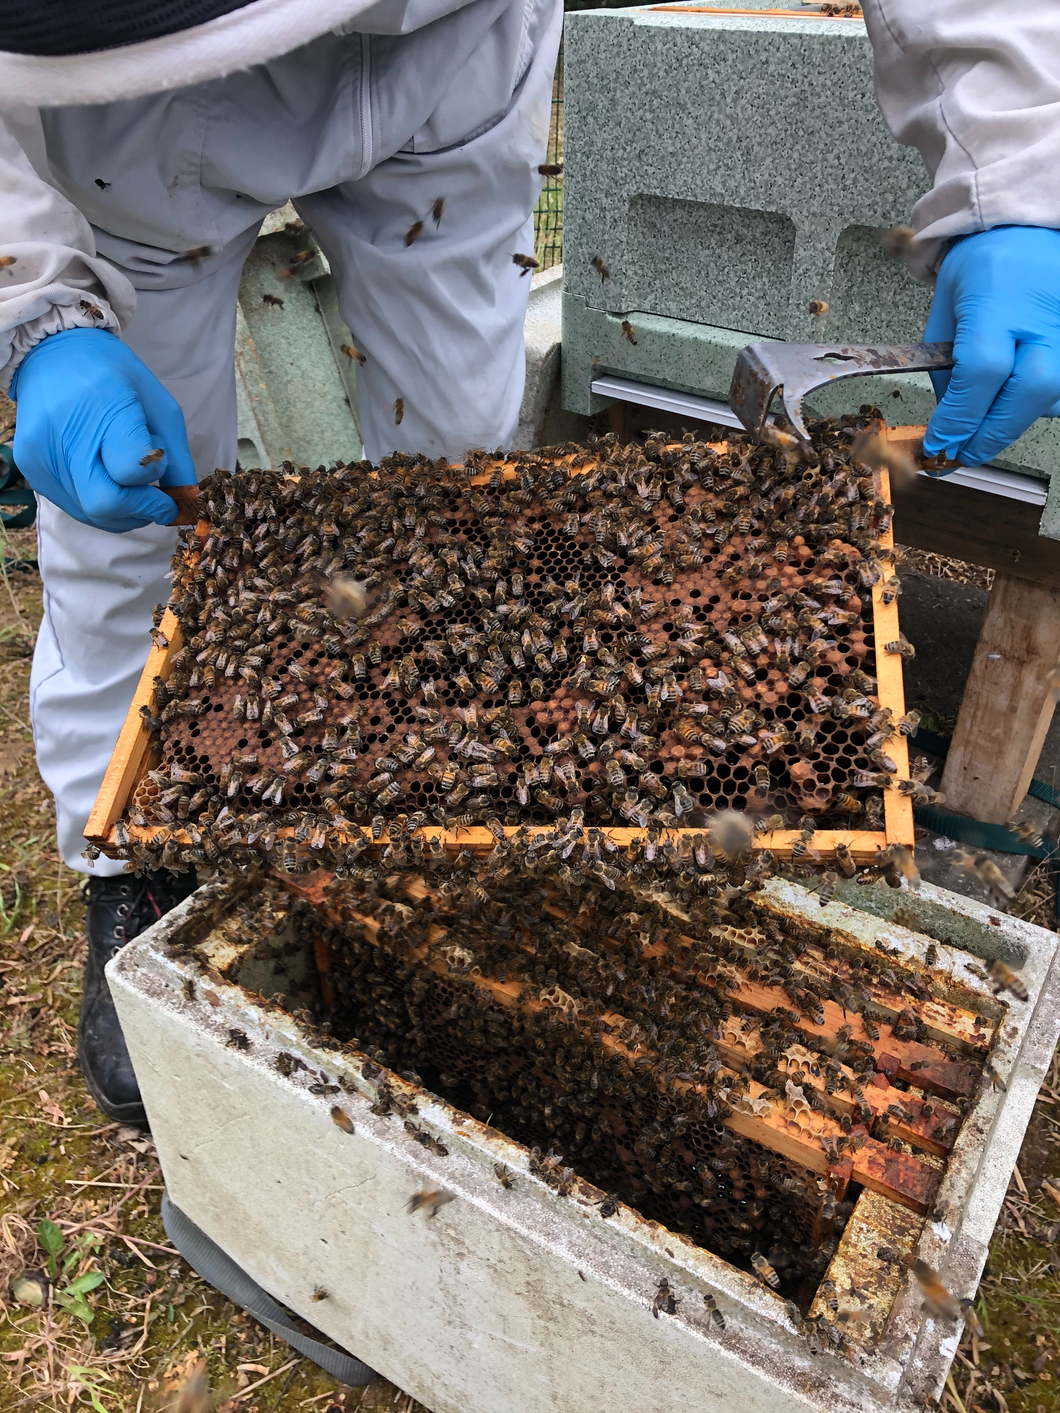 Beekeeping Experience £45.00 per person